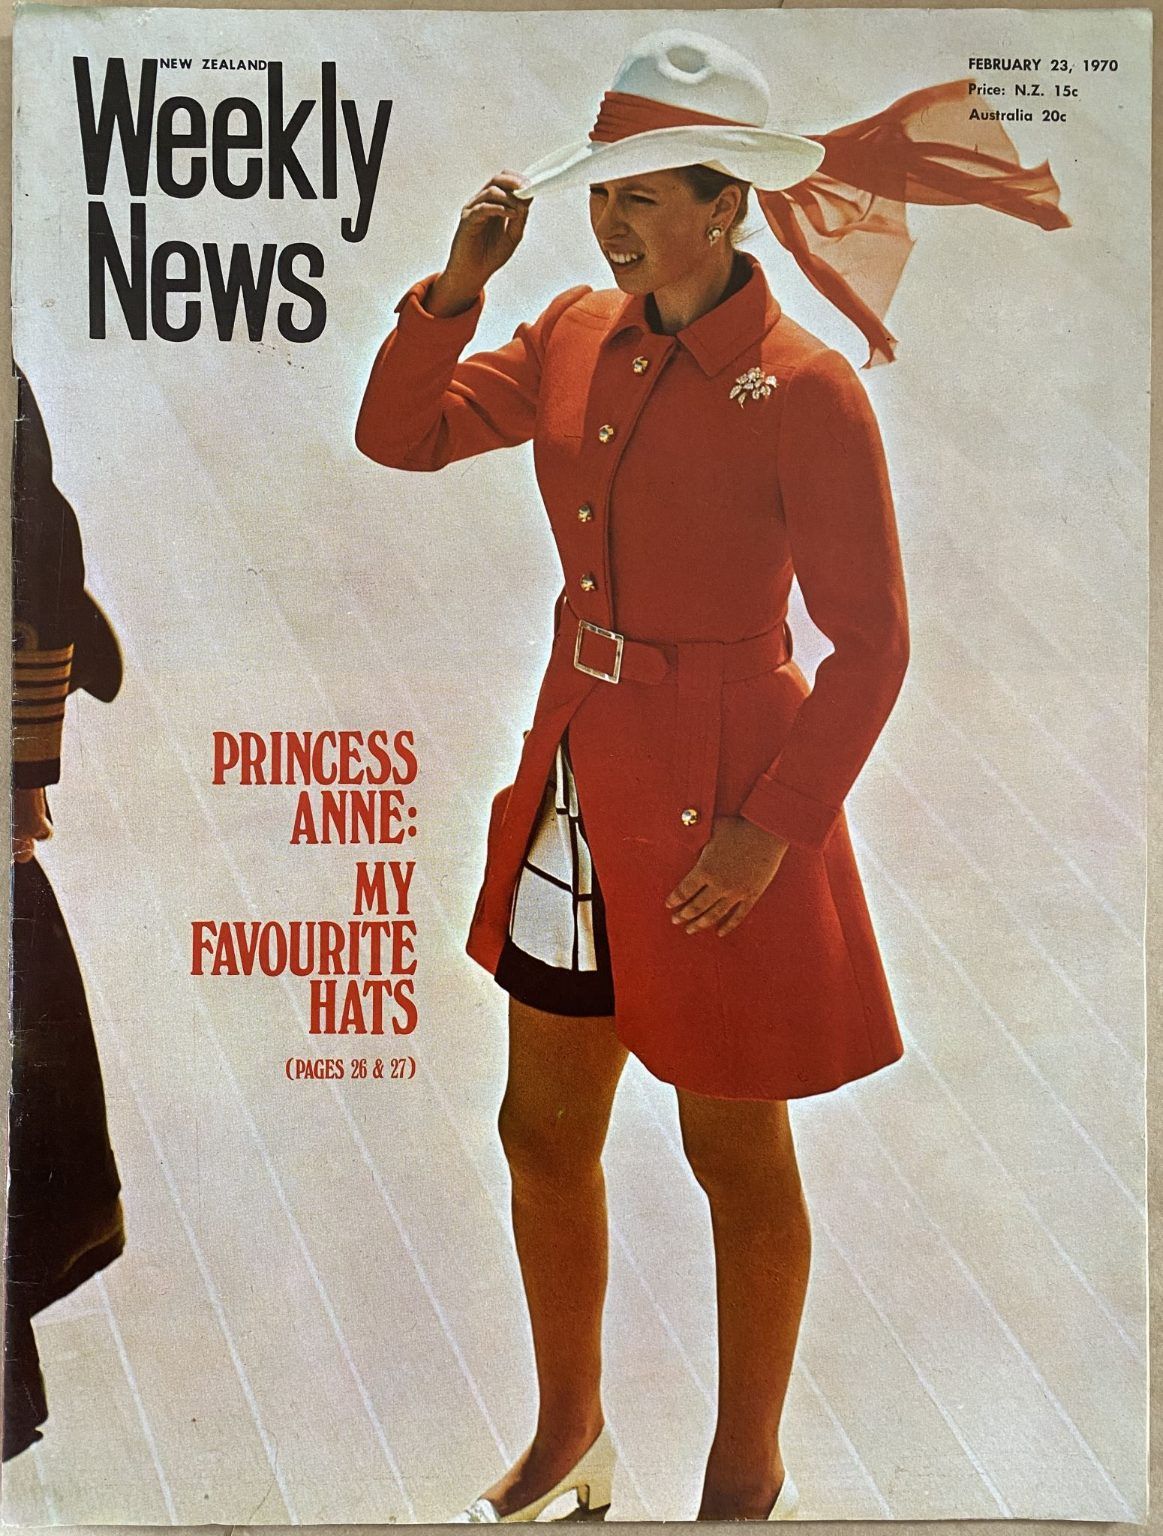 OLD NEWSPAPER: New Zealand Weekly News, No. 5543, 23 February 1970